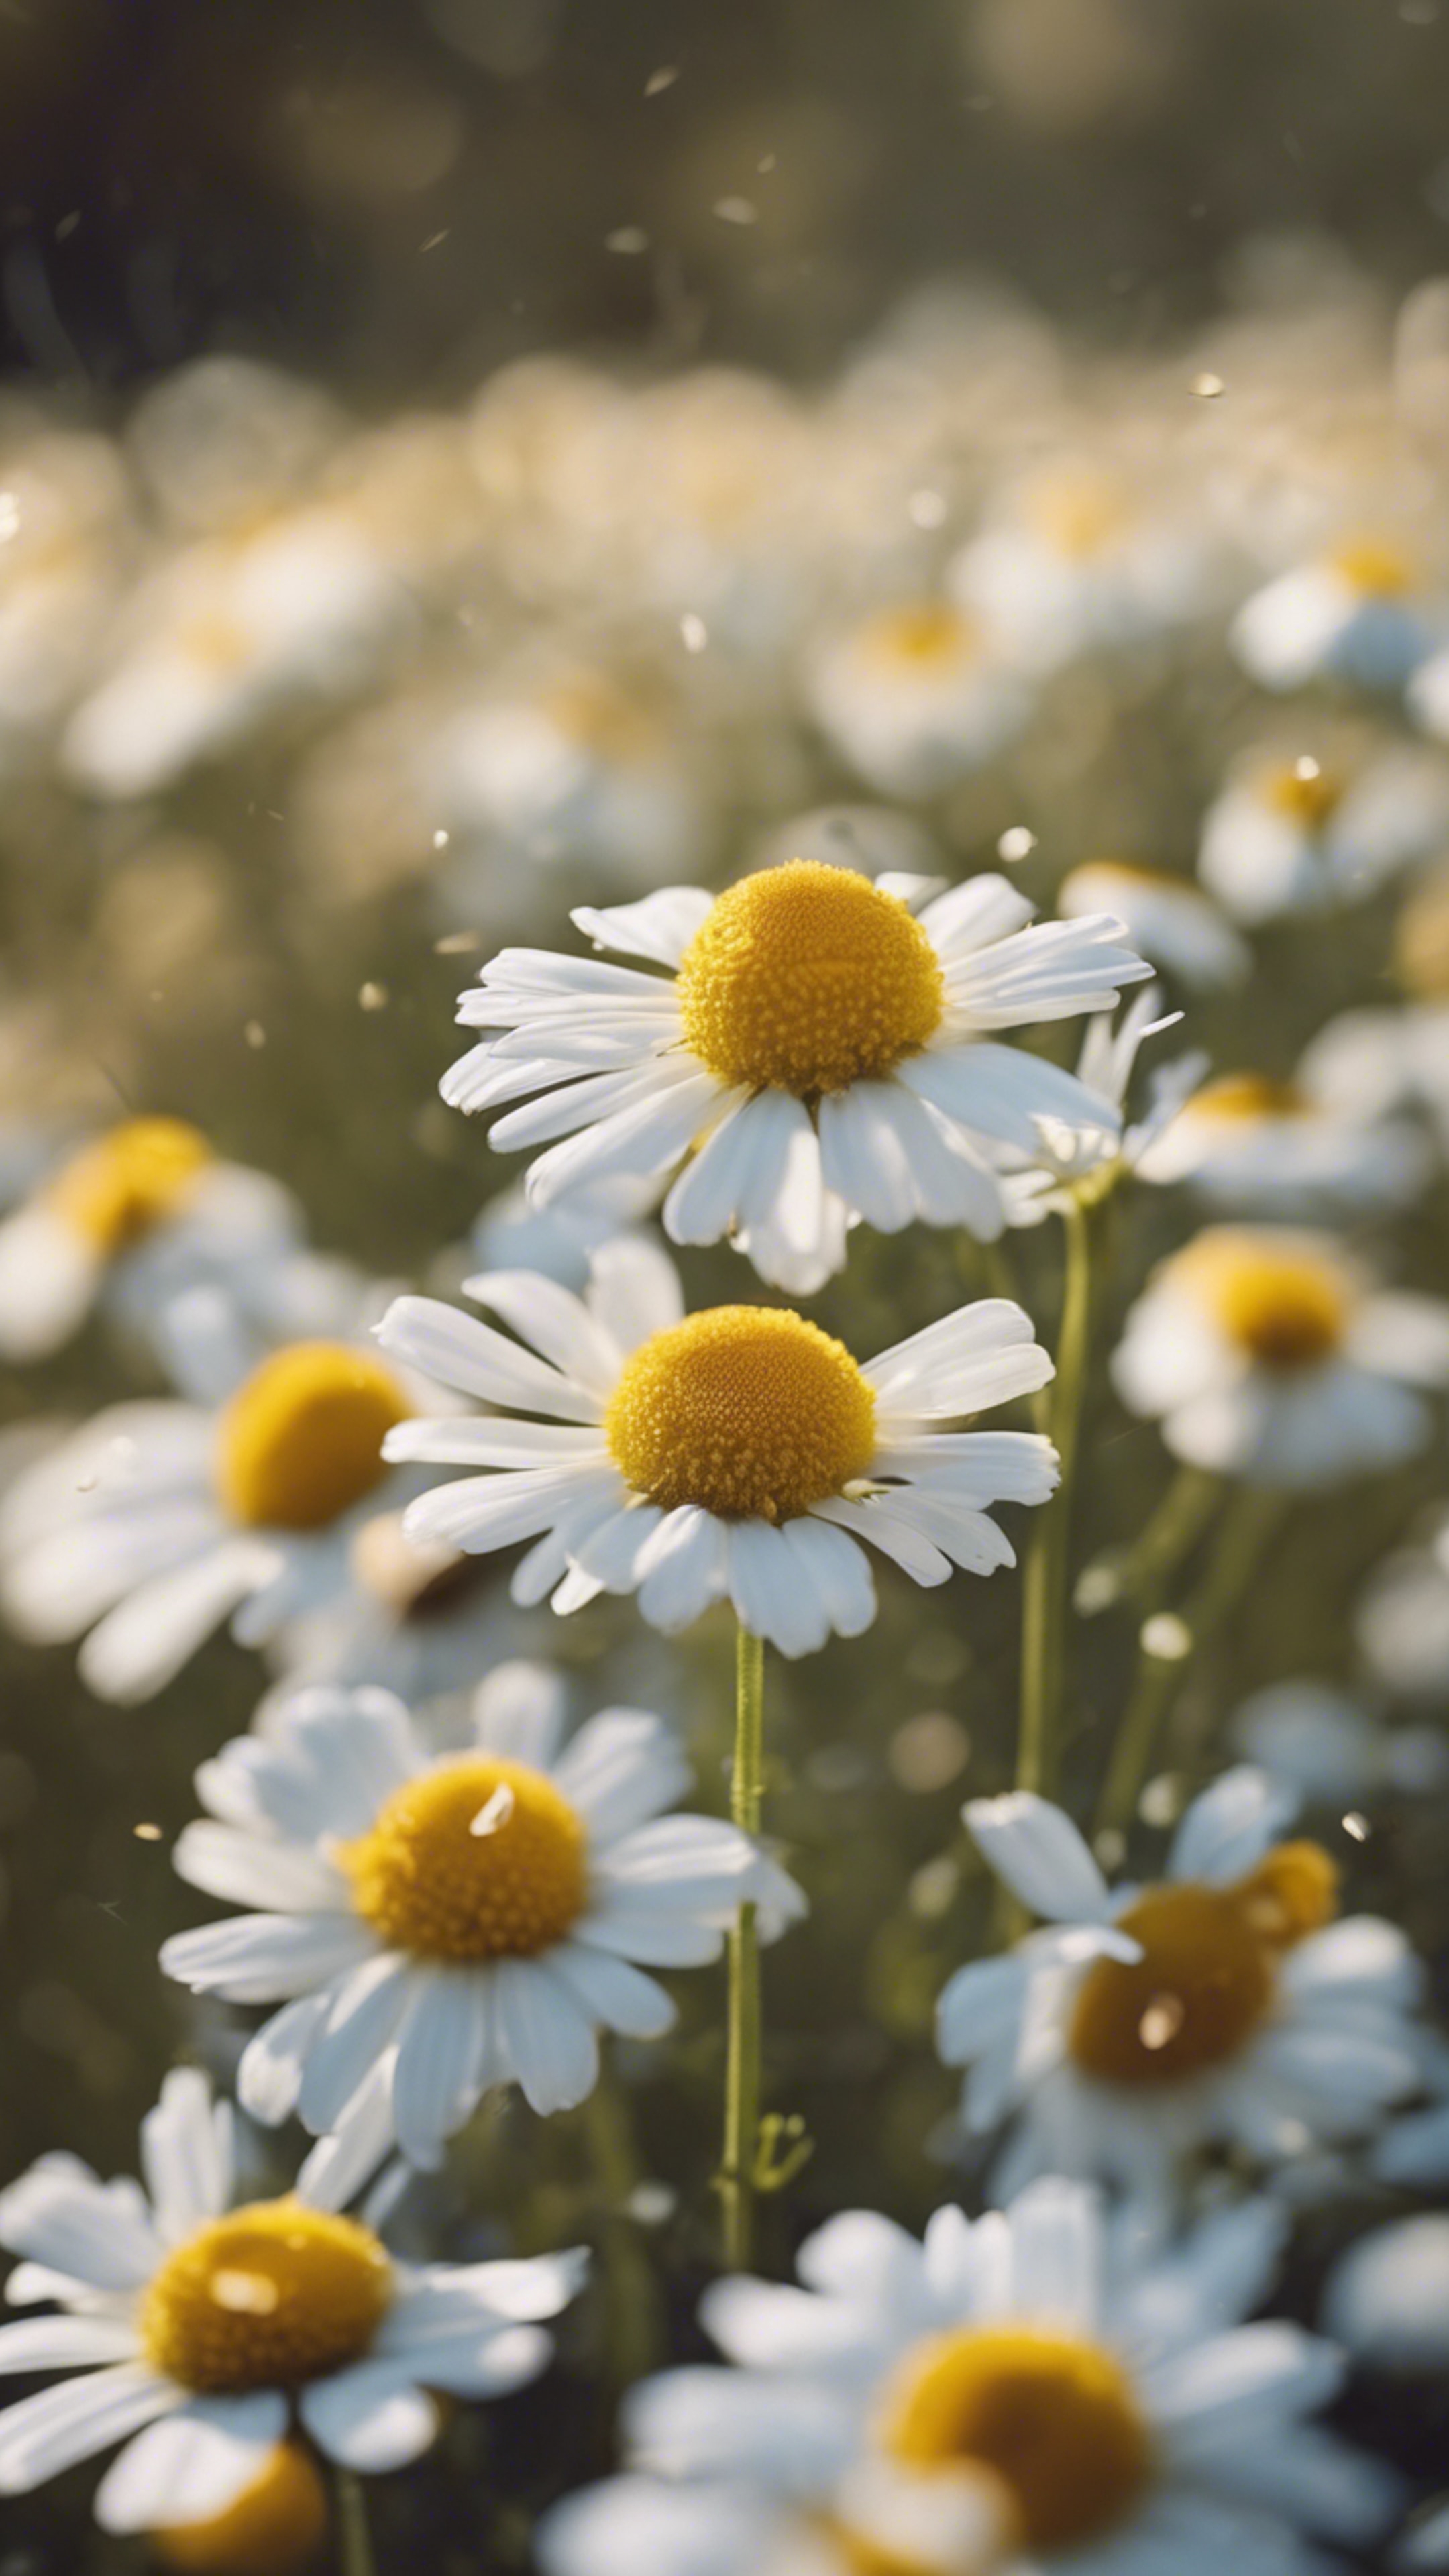 A dense field of chamomile flowers bathed in soft morning sunlight. Tapéta[24173eec96654bd5b545]